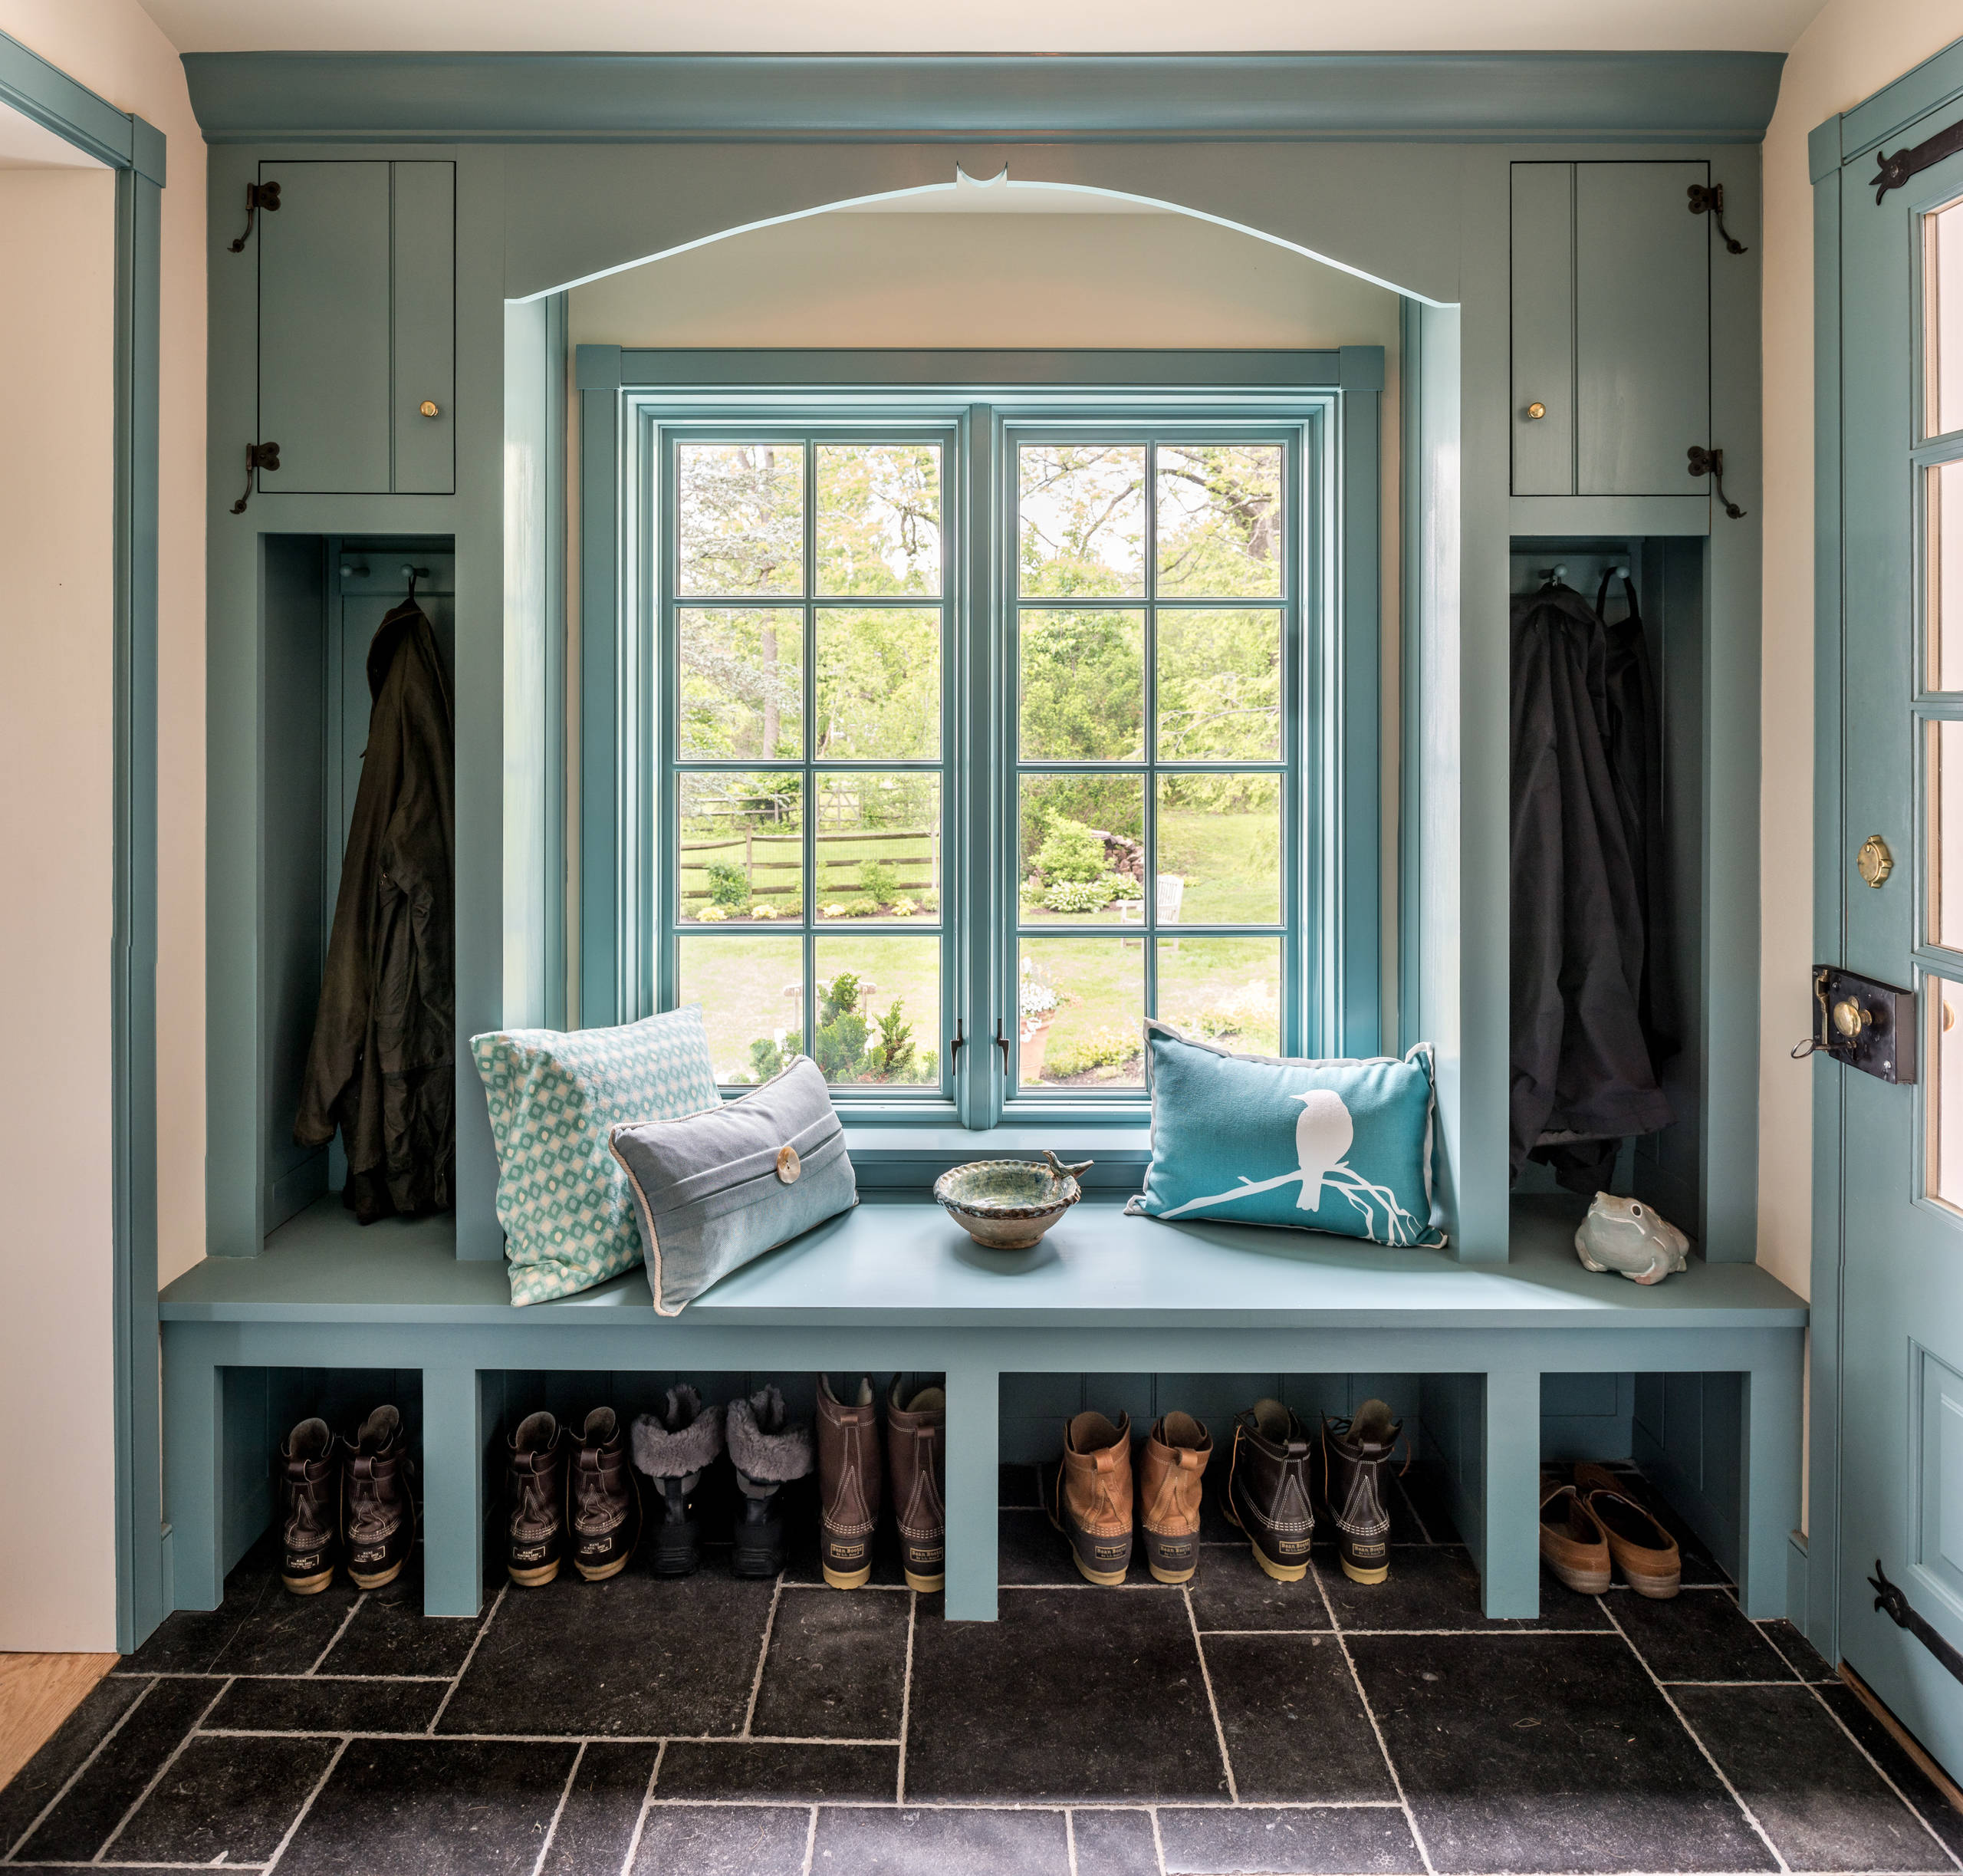 15 Small Entryway Storage Ideas - The Turquoise Home